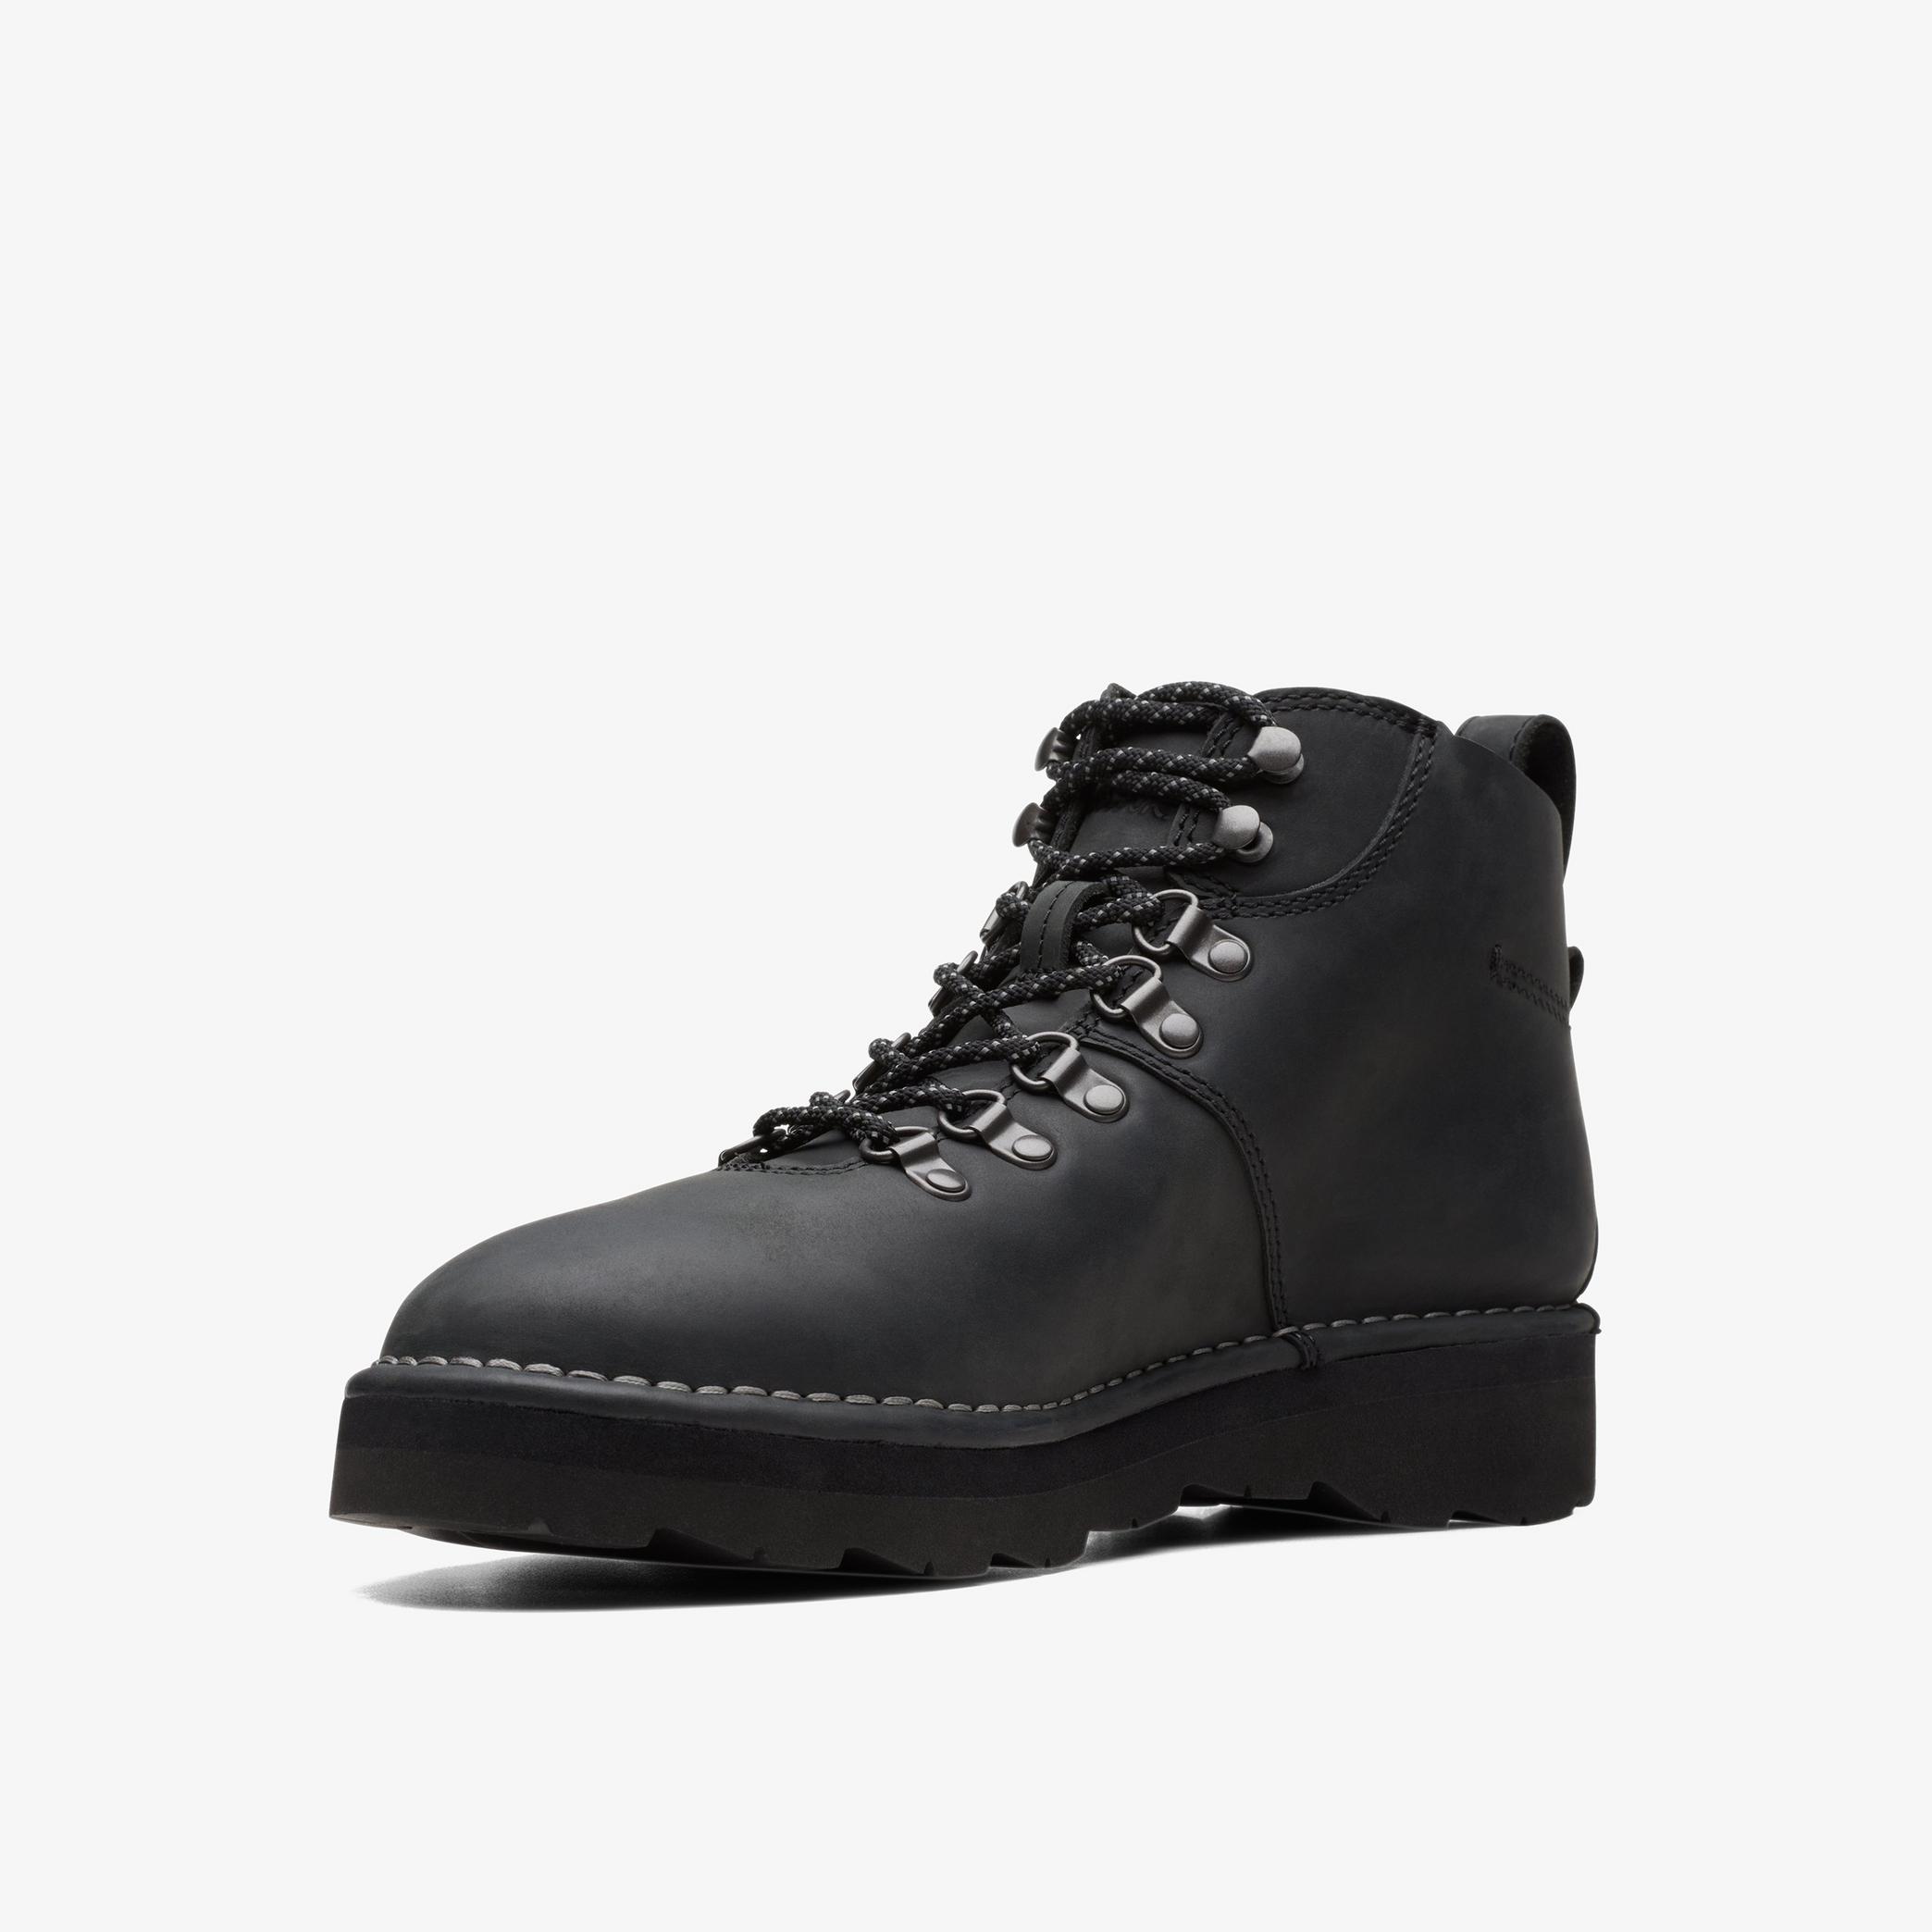 MENS Craftdale Hike Black Leather Ankle Boots | Clarks Outlet